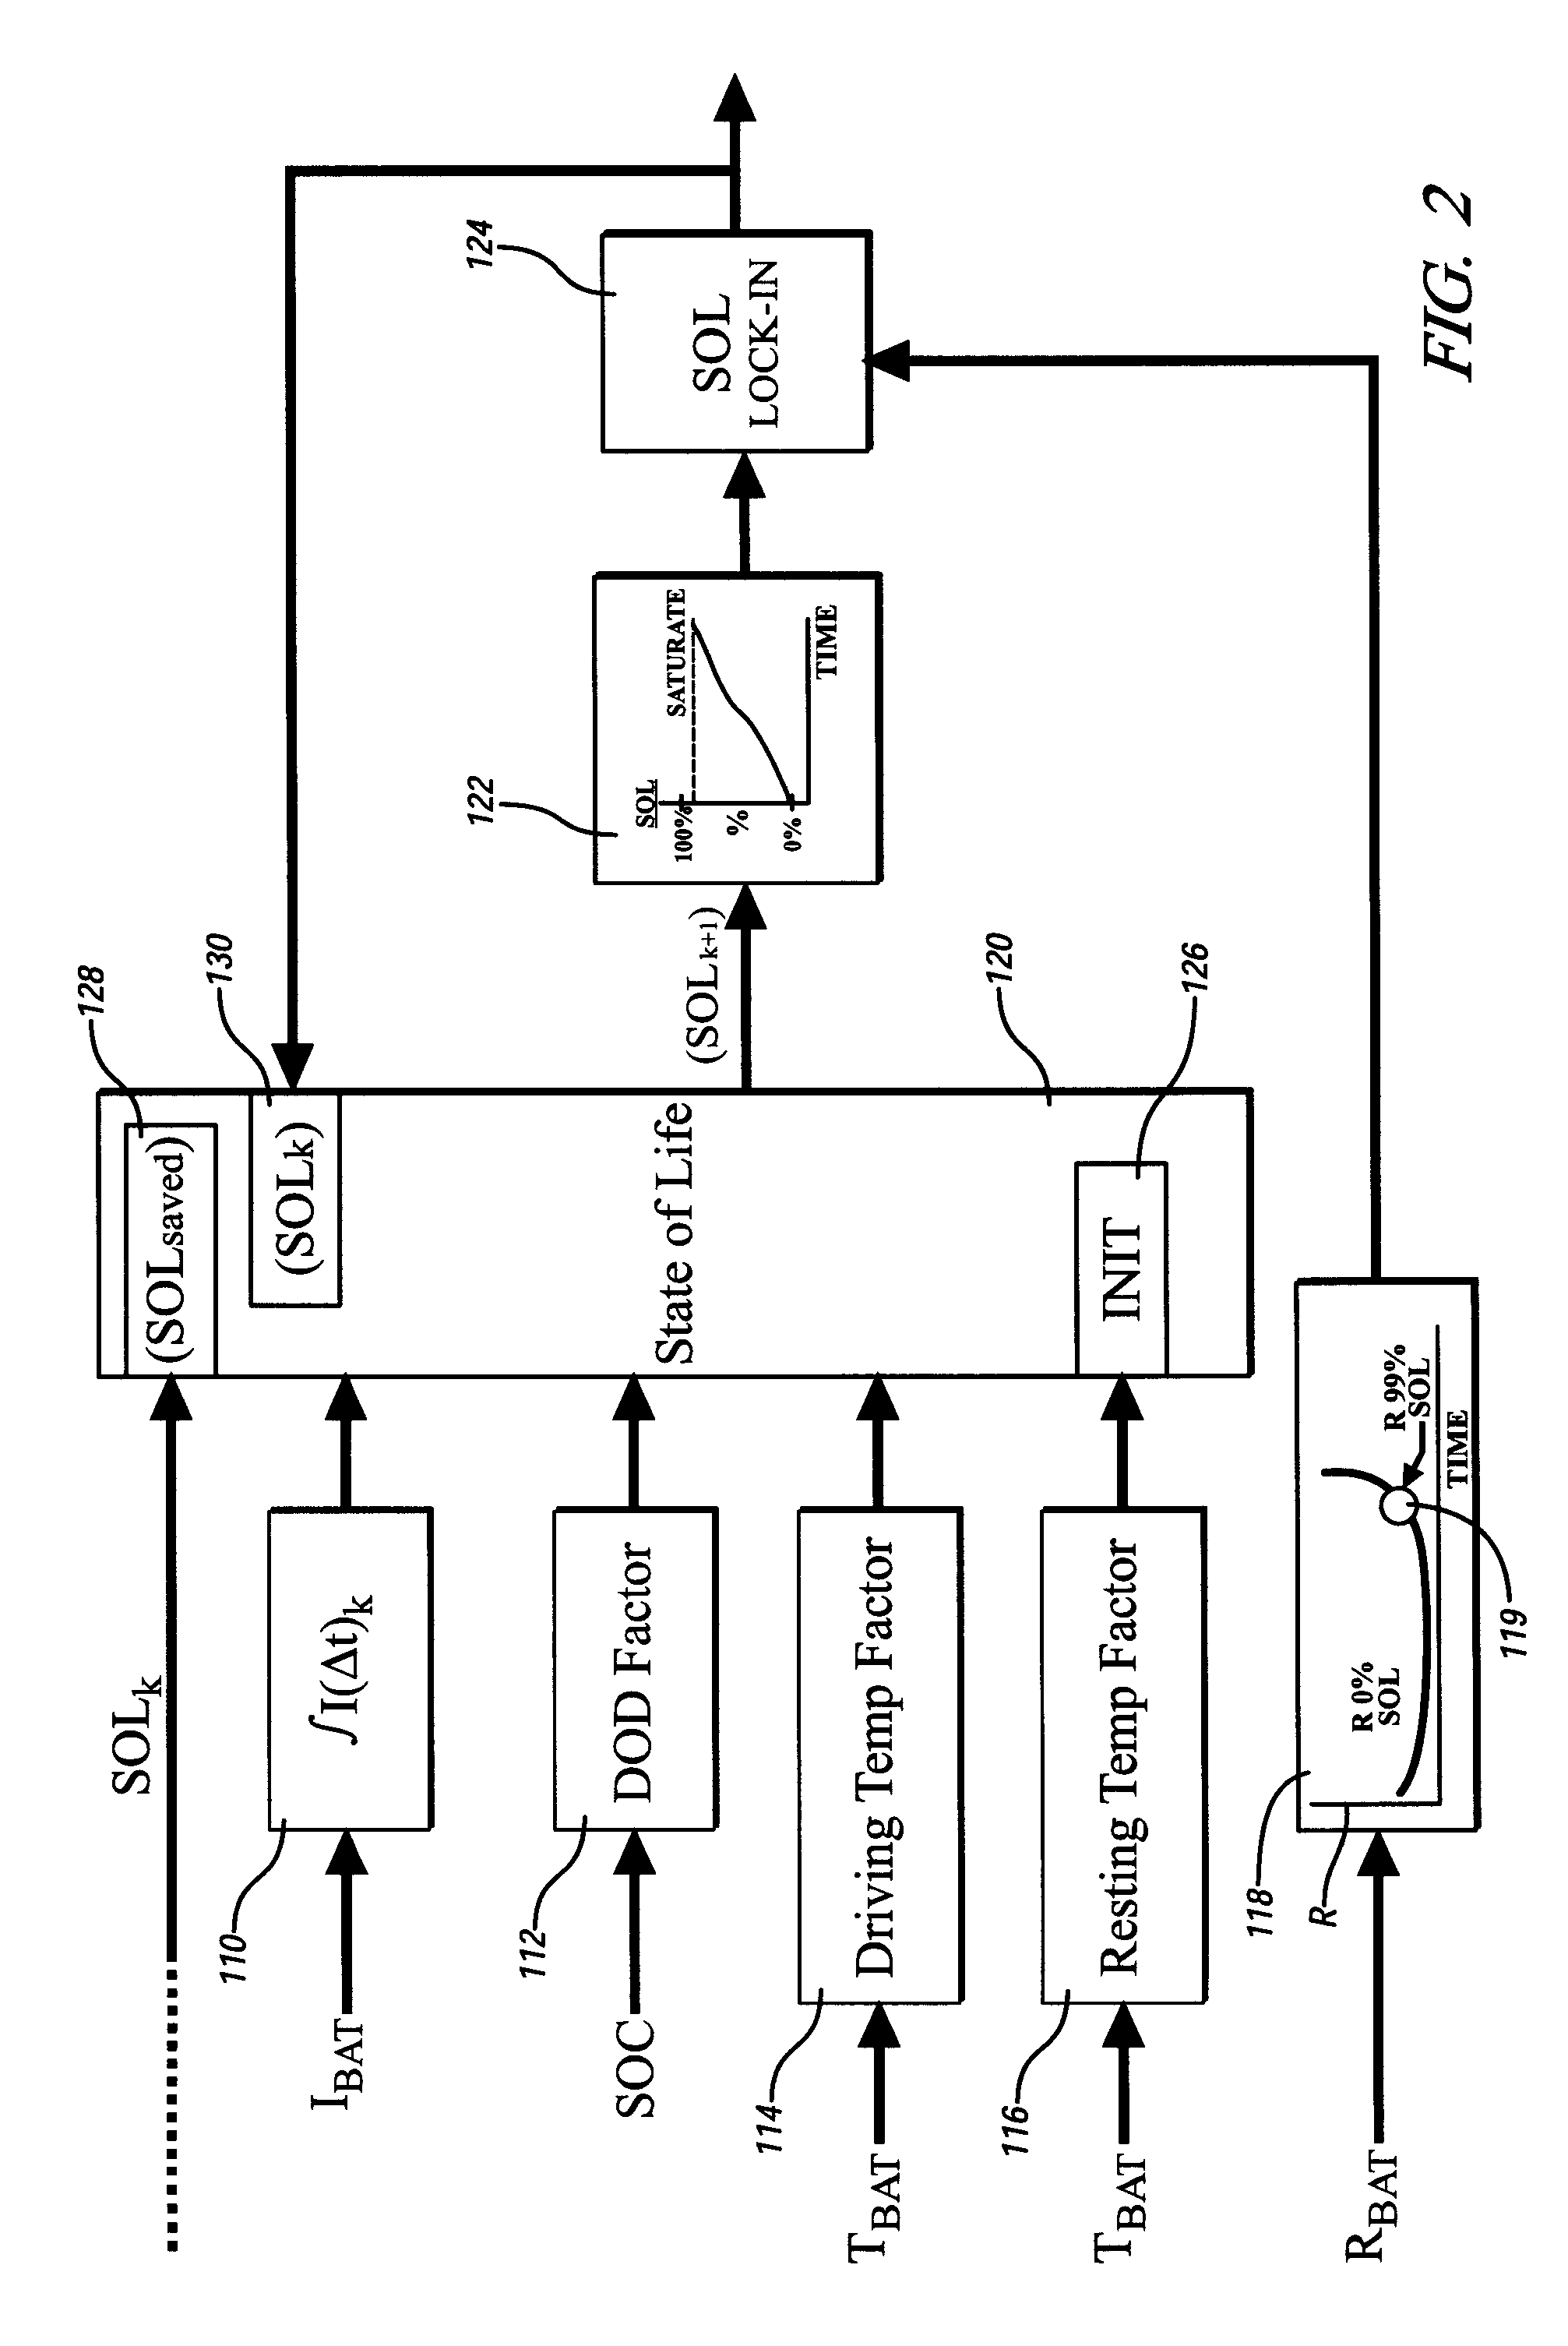 Method and apparatus for management of an electric energy storage device to achieve a target life objective